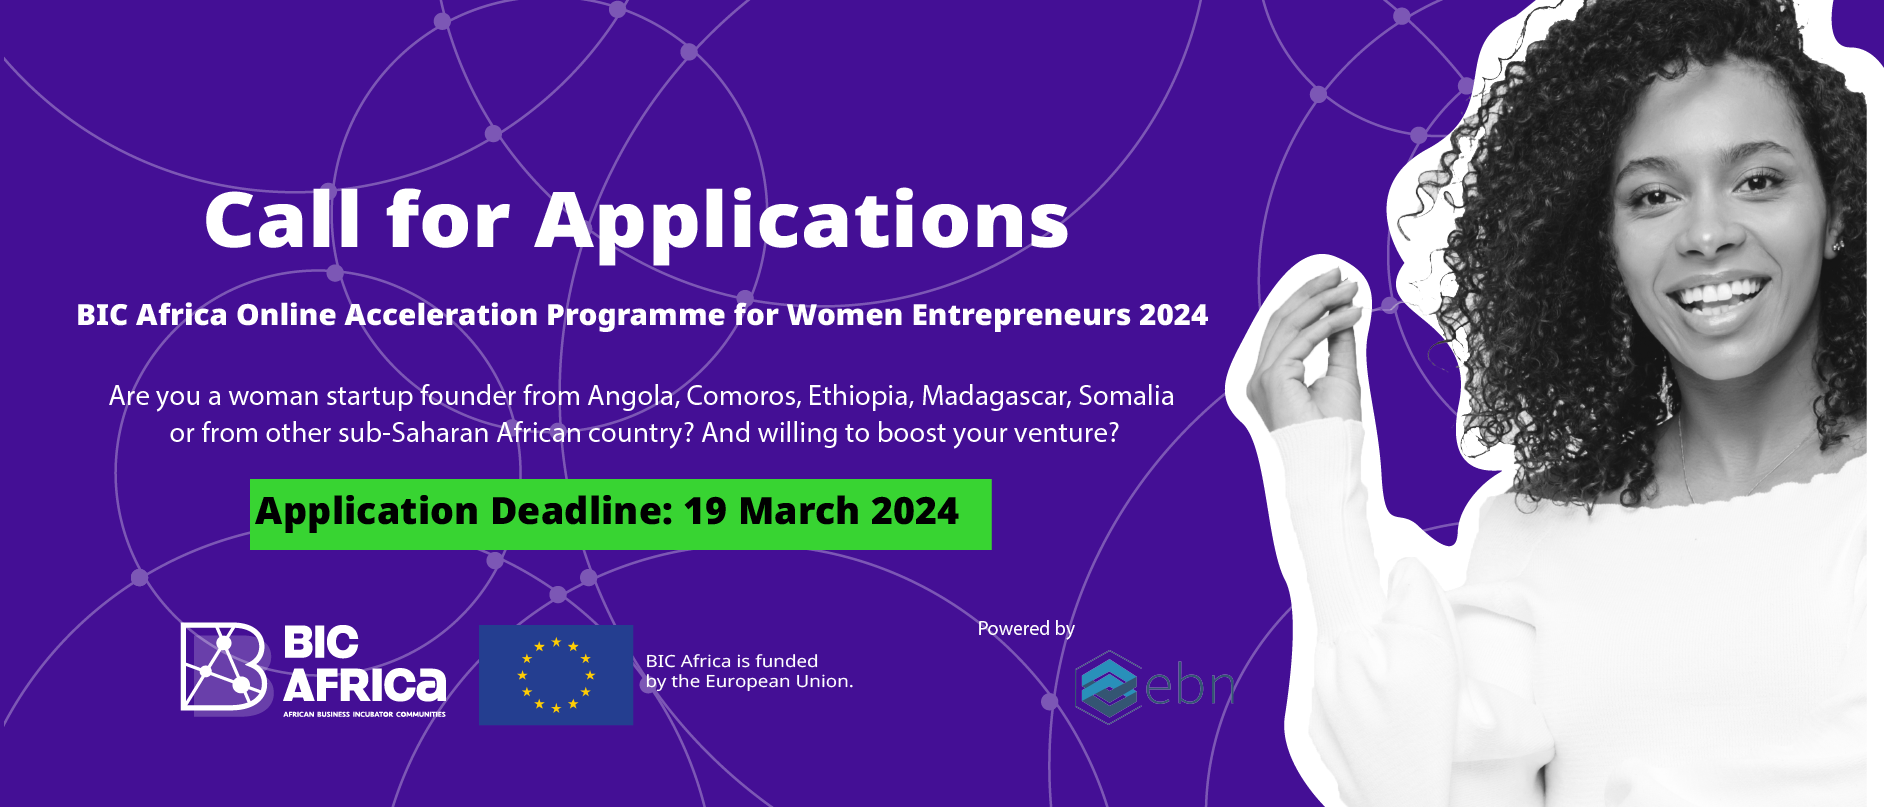 Call for Applications: BIC Africa Online Acceleration Programme 2024 for Women Entrepreneurs